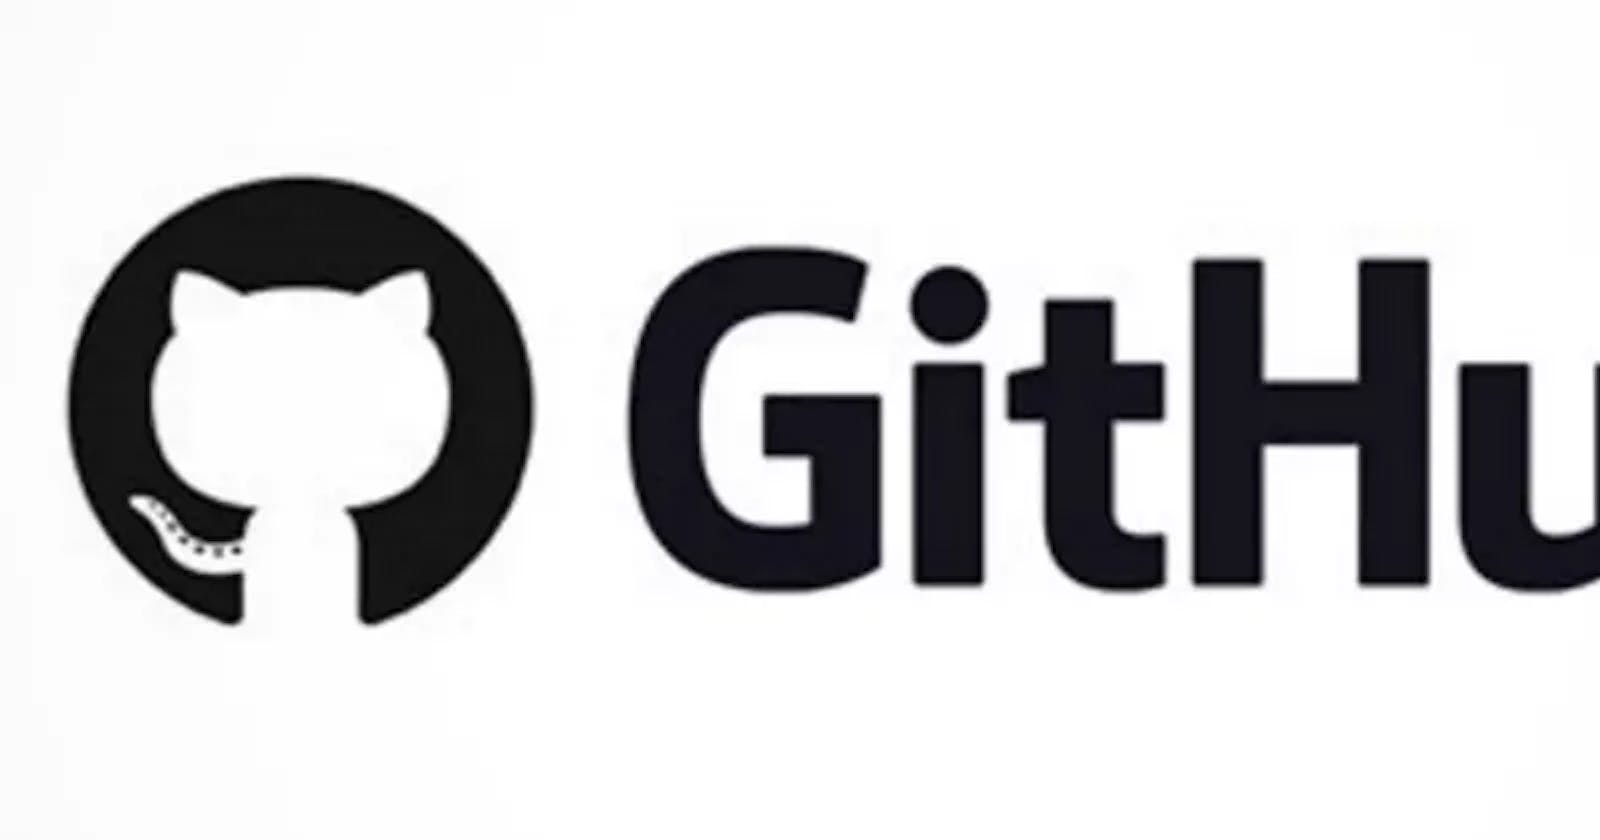 10 Github Essential commands.